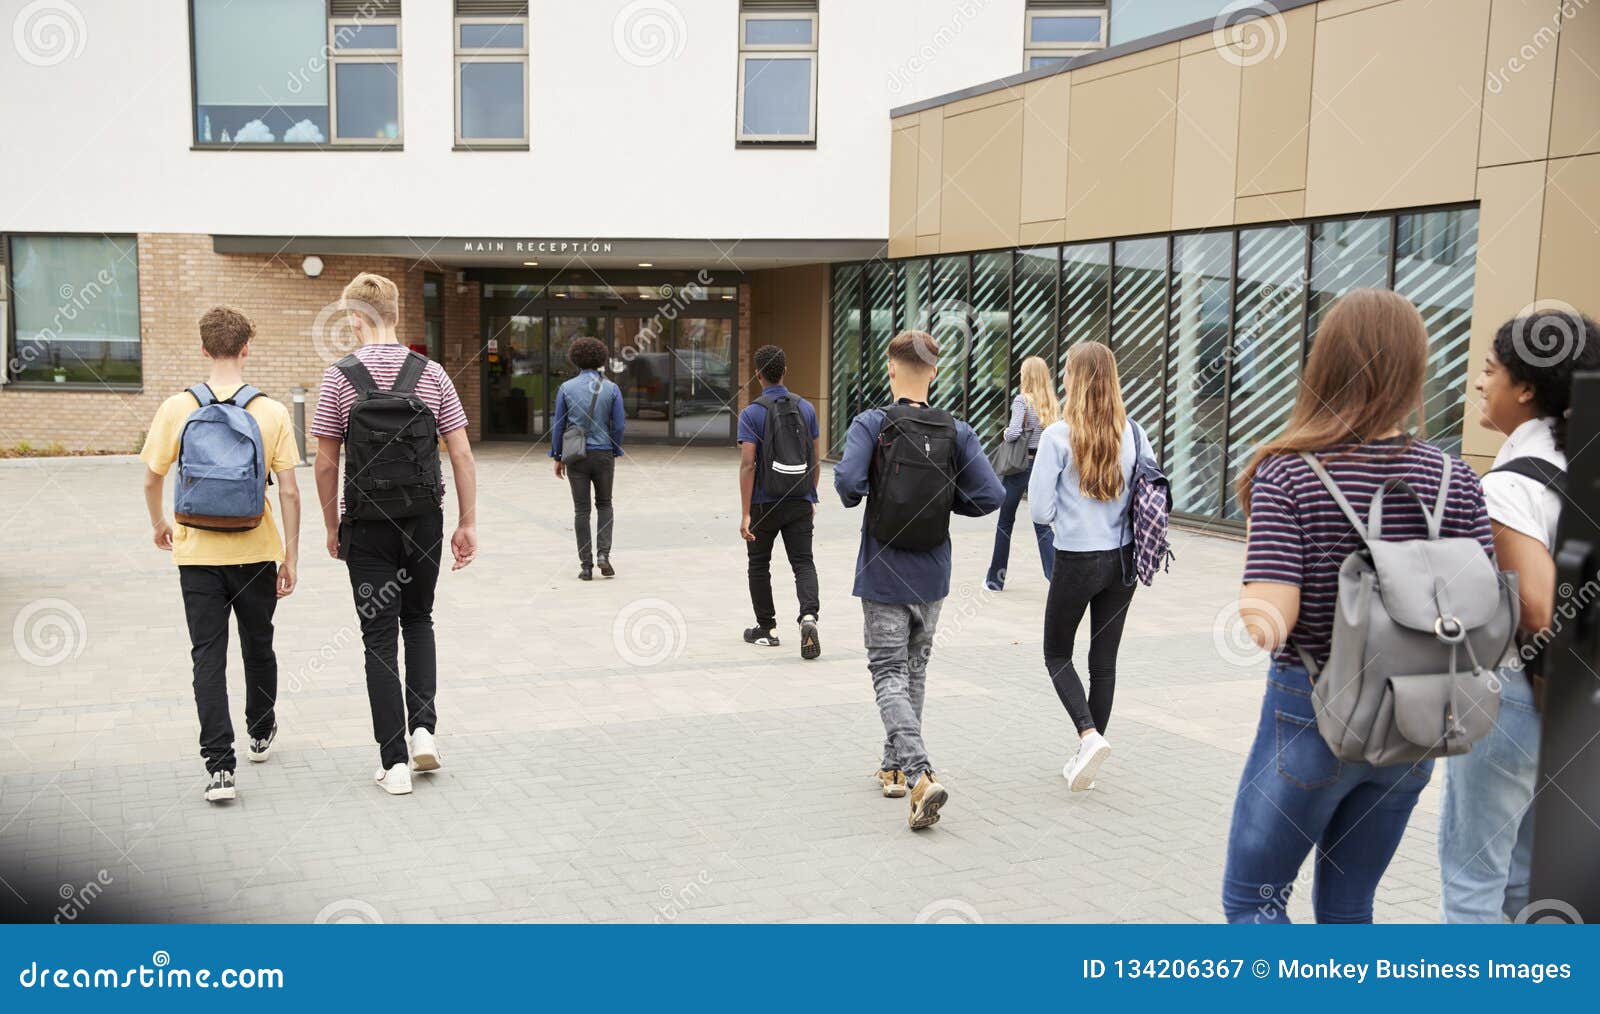 rear view of high school students walking into college building together